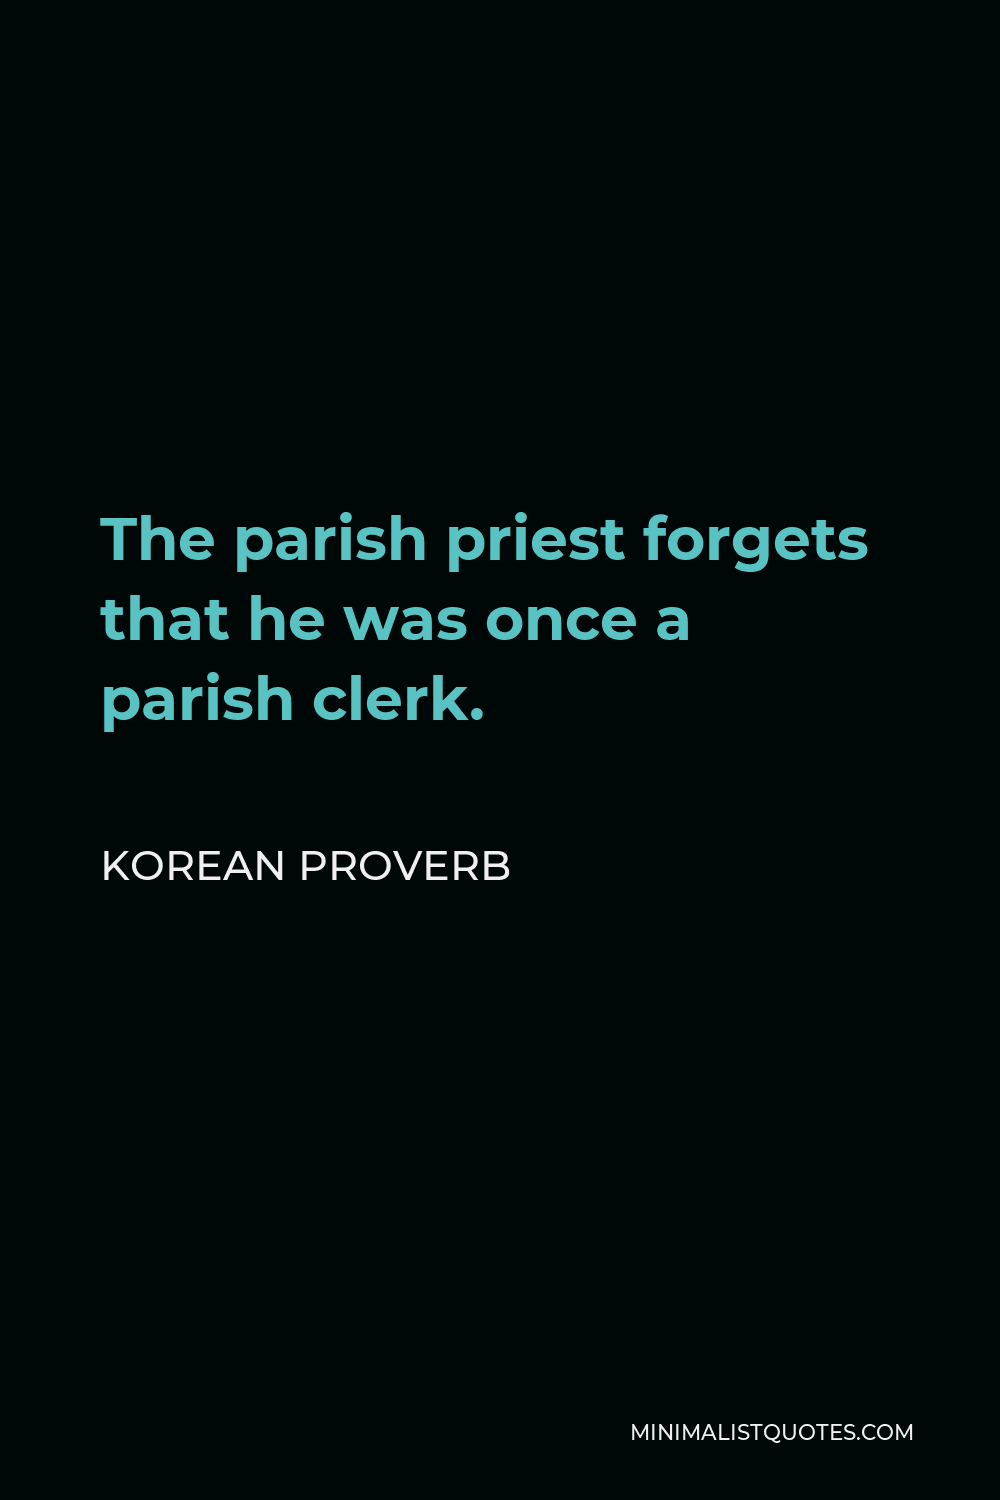 Korean Proverb Quote - The parish priest forgets that he was once a parish clerk.